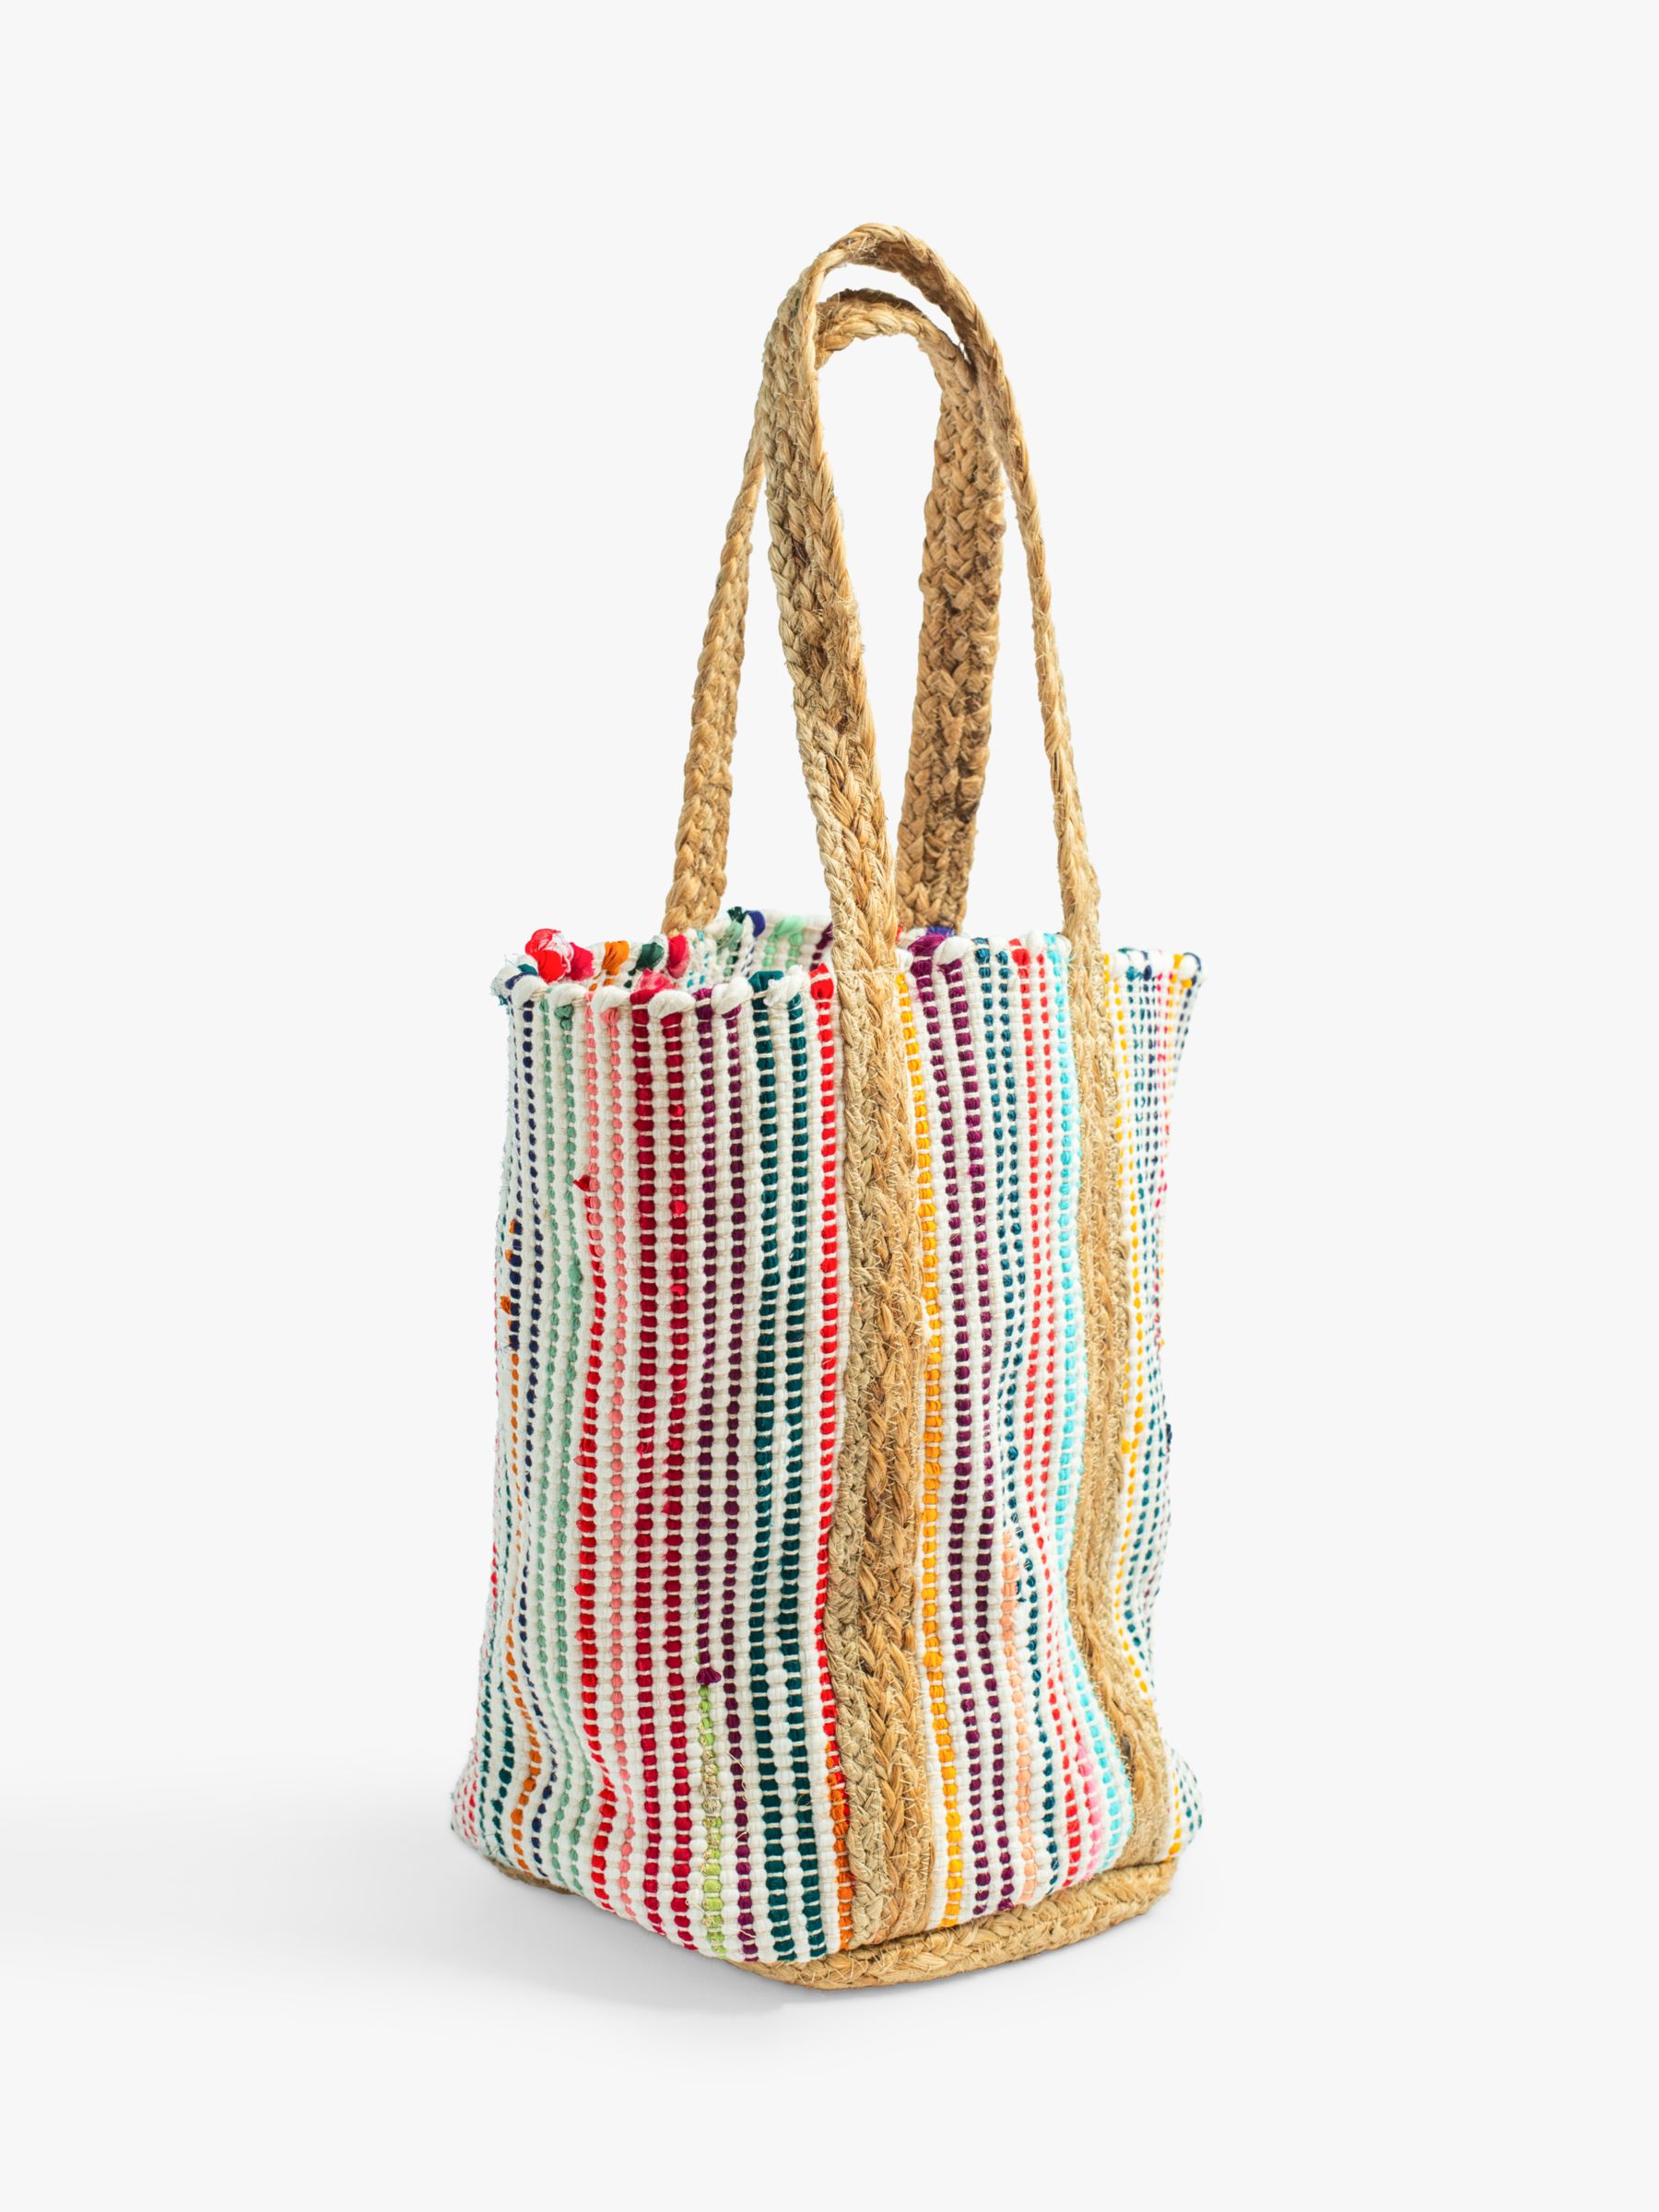 Bloom & Bay Shell Woven Stripe Tote Bag, Multi, One Size